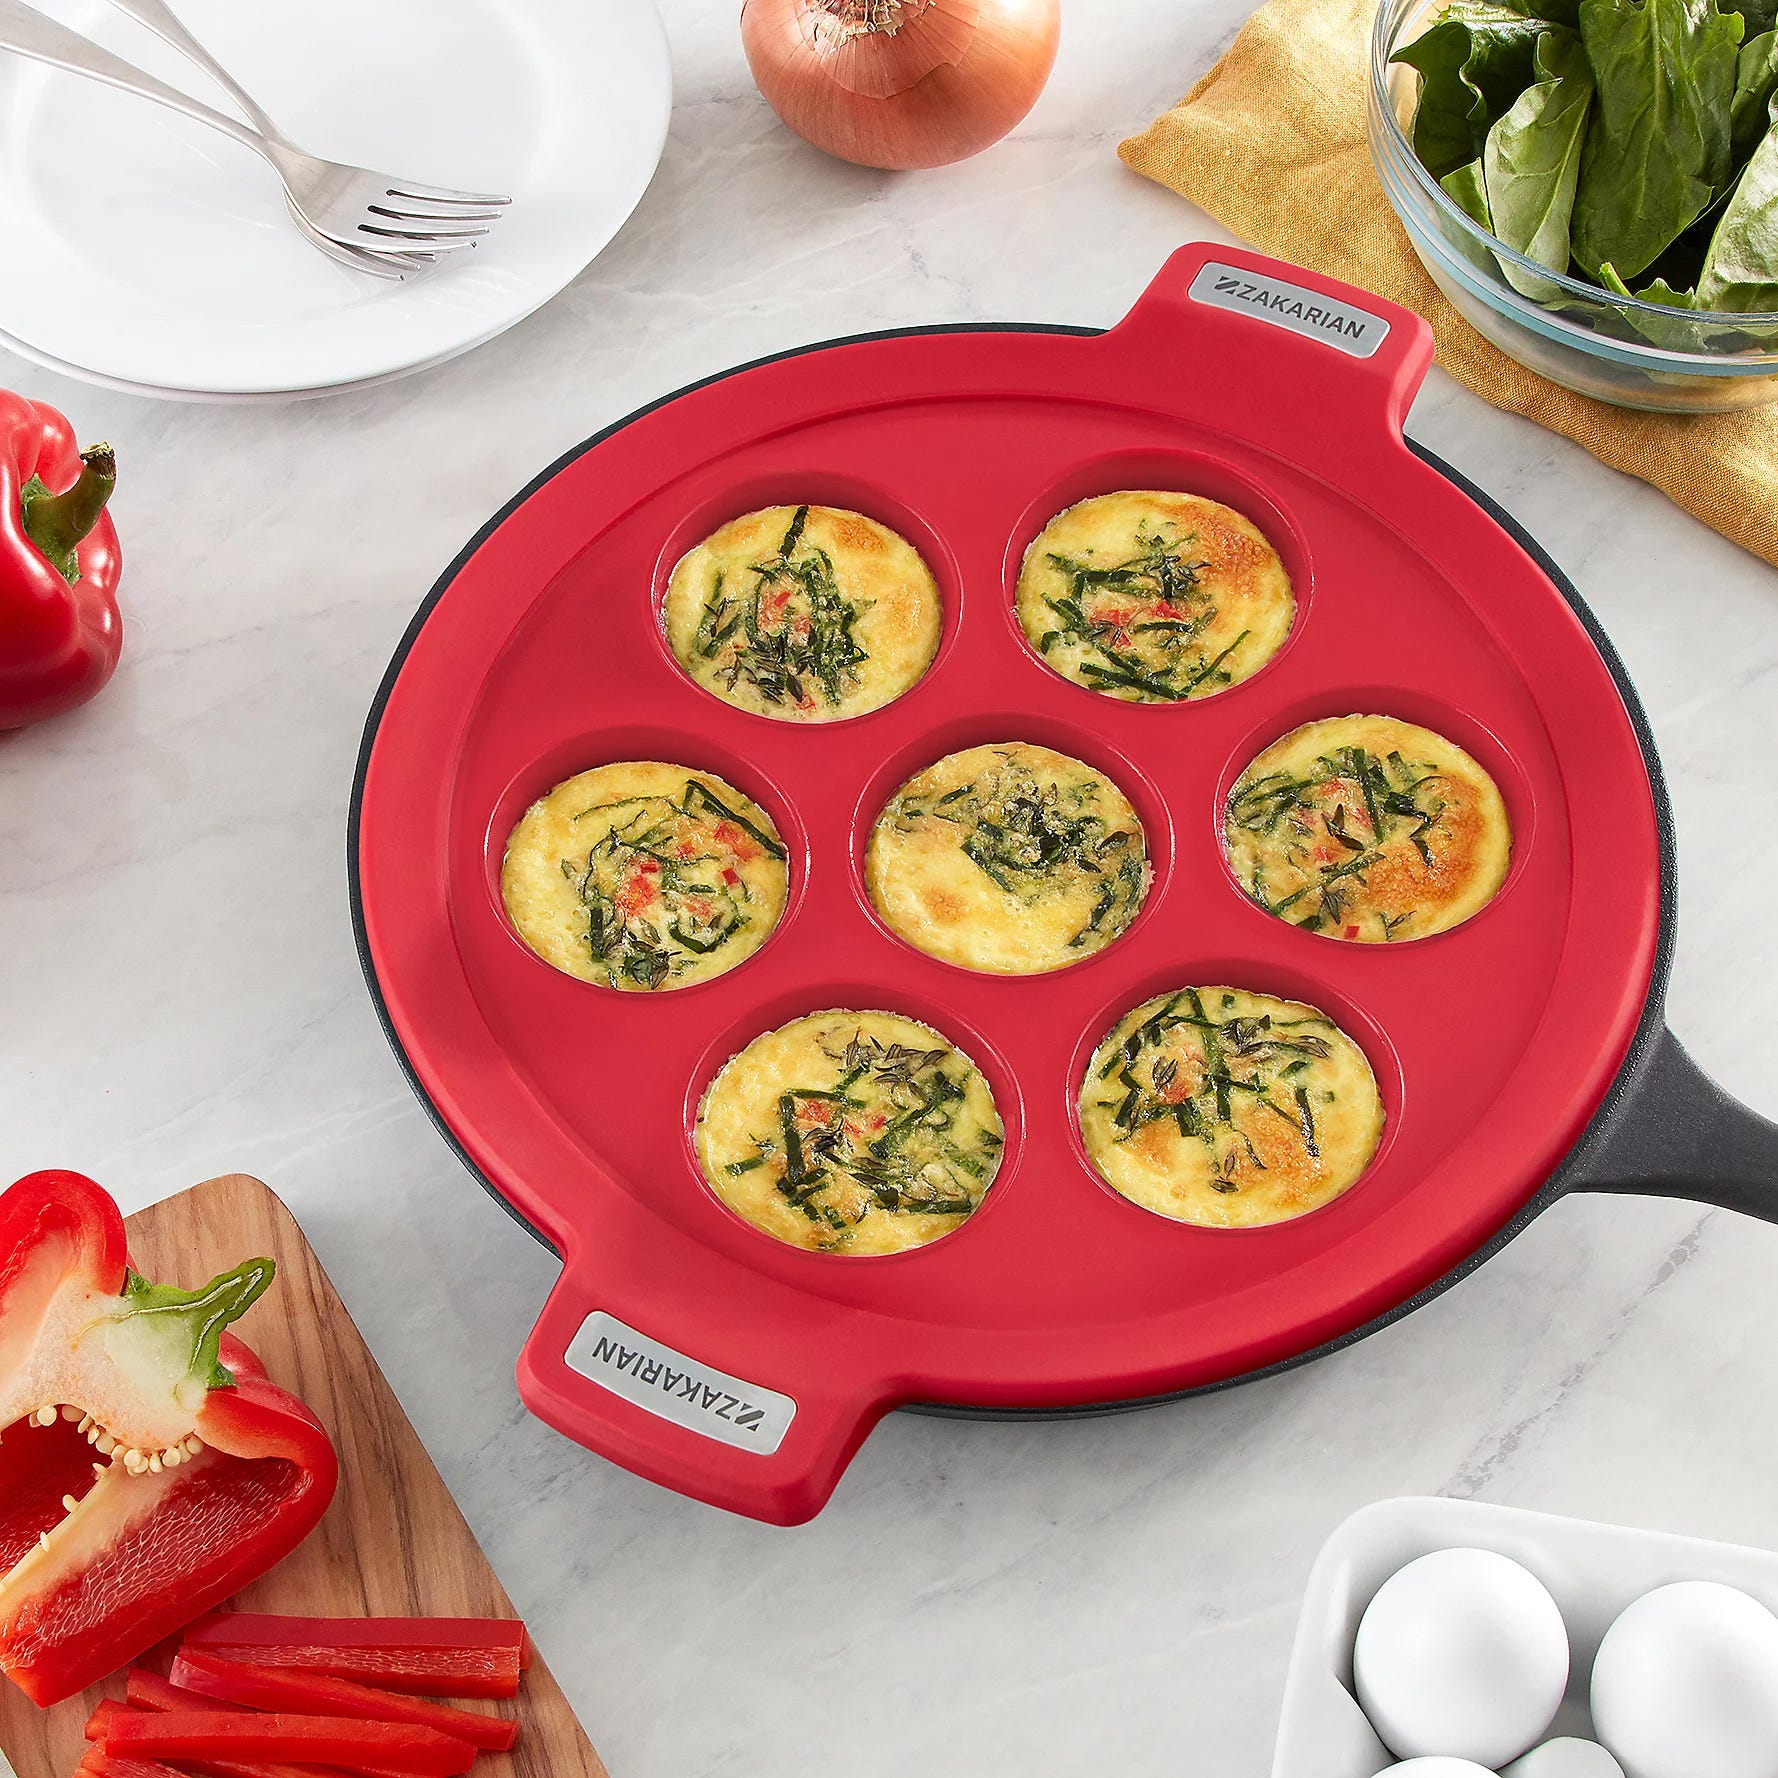 Red silicone egg bite mold with multiple compartments filled with cooked spinach and red pepper egg bites, used on a stovetop.